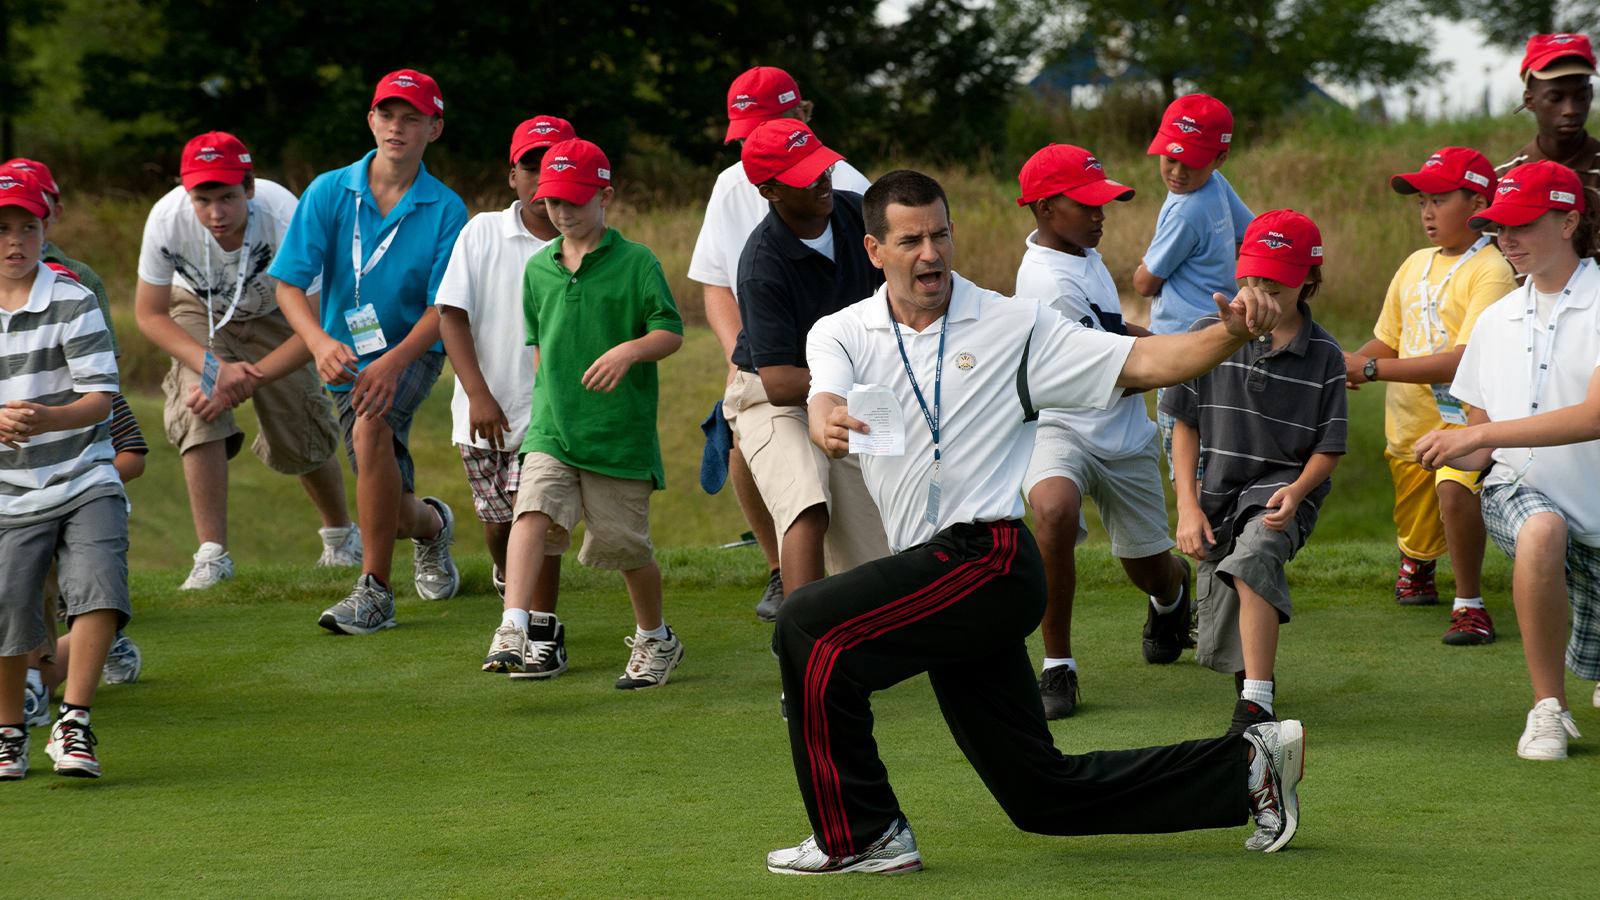 David Donatucci working with Juniors on exercises during a youth clinic. (Photo by Montana Pritchard/The PGA of America)